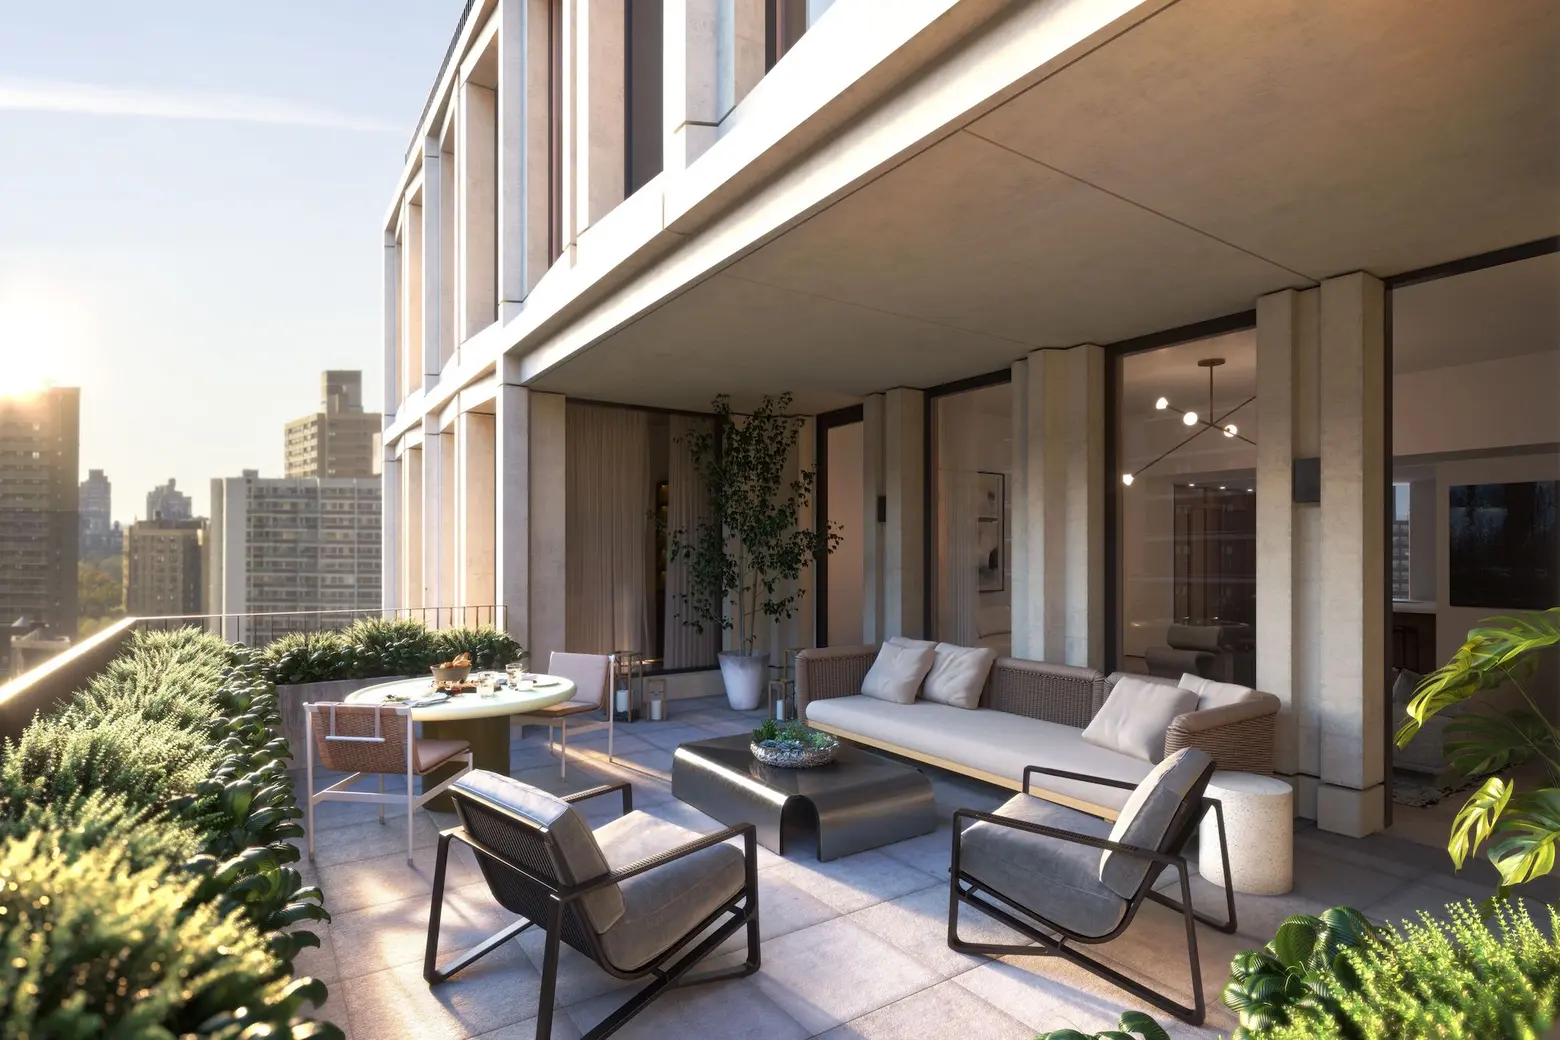 Upper West Side condo tower that replaced century-old synagogue reveals new looks